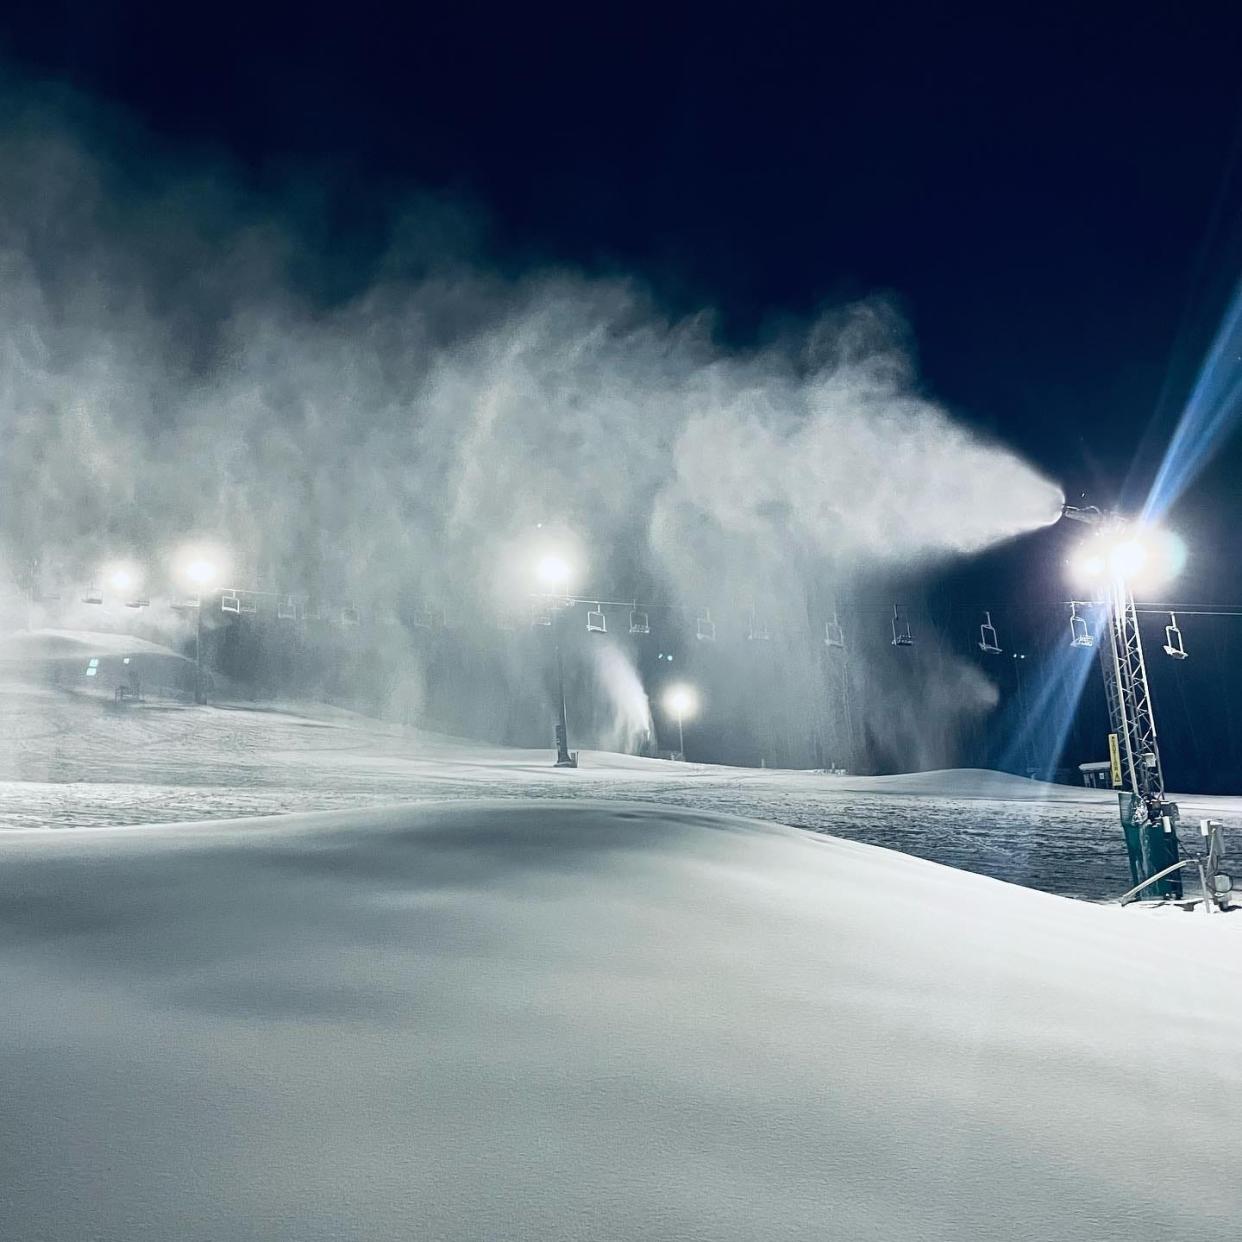 Snow guns blanket the slopes at Swiss Valley Ski & Snowboard Area in Jones this past weekend to prepare for opening.